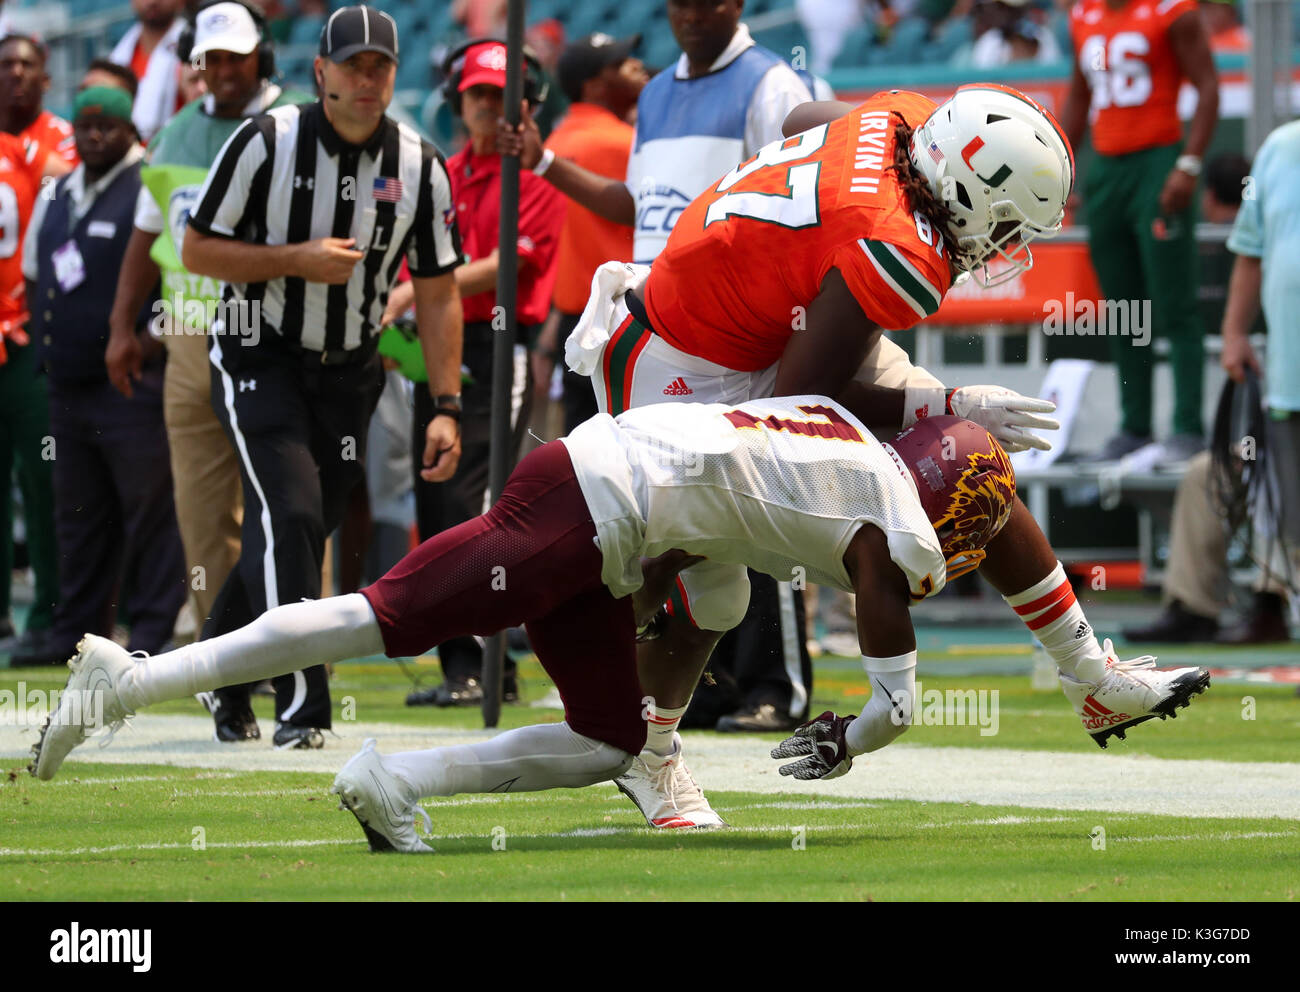 Miami Gardens, Florida, USA. 02nd Sep, 2017. Miami Hurricanes tight end Michael Irvin II (87) advances the ball, avoiding a tackle by Bethune Cookman Wildcats cornerback Elliott Miller (7), during the college football game between the Bethune-Cookman Wildcats and the Miami Hurricanes at the Hard Rock Stadium in Miami Gardens, Florida. The Hurricanes won 41-13. Mario Houben/CSM/Alamy Live News Stock Photo